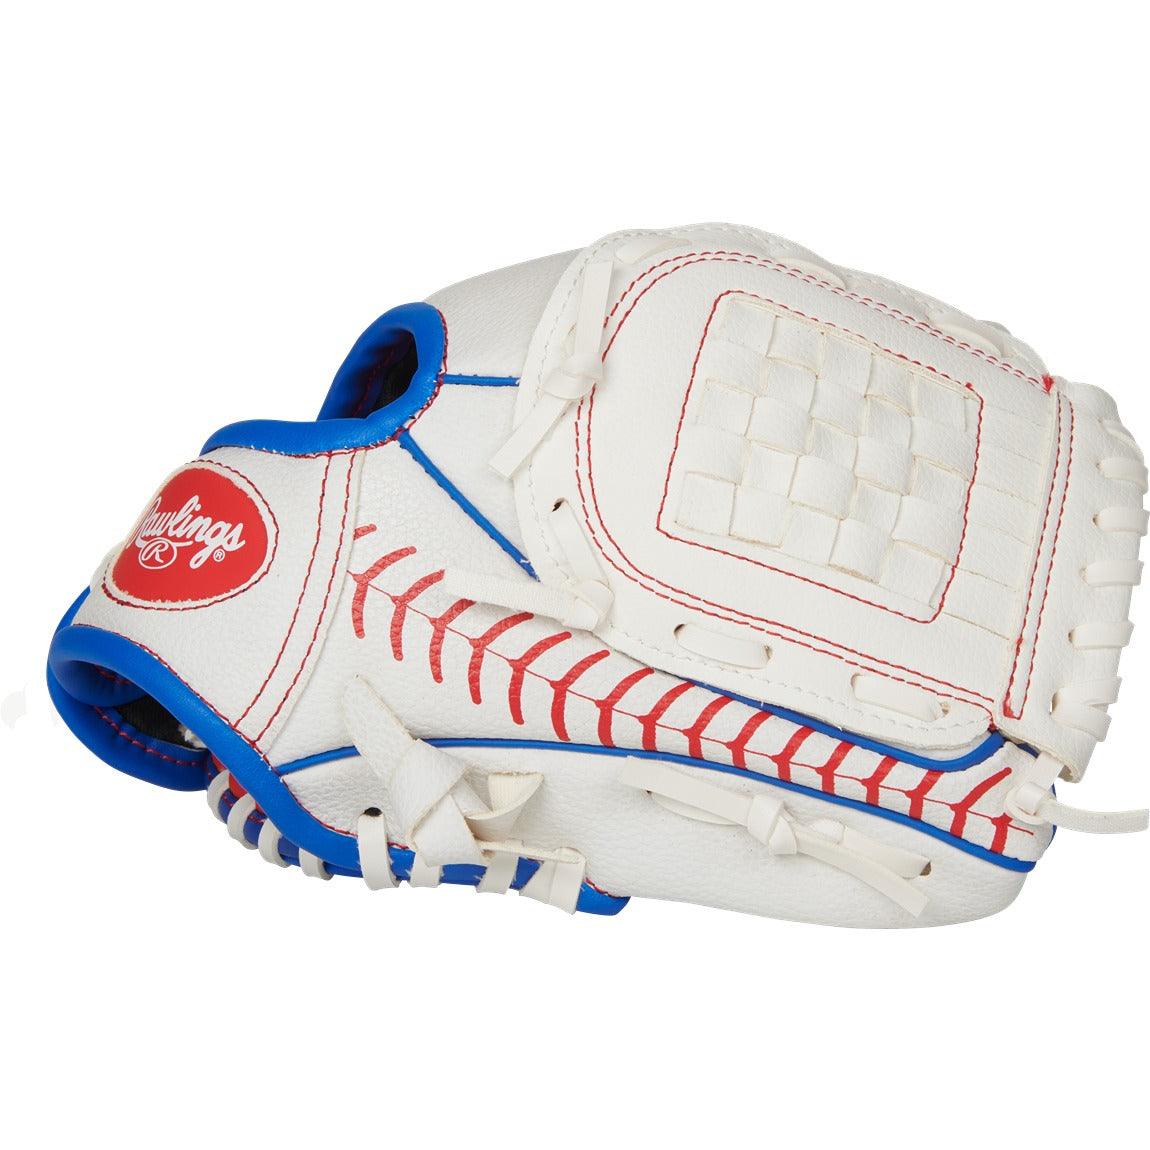 Players 9" Baseball Glove with Ball- Youth - Sports Excellence